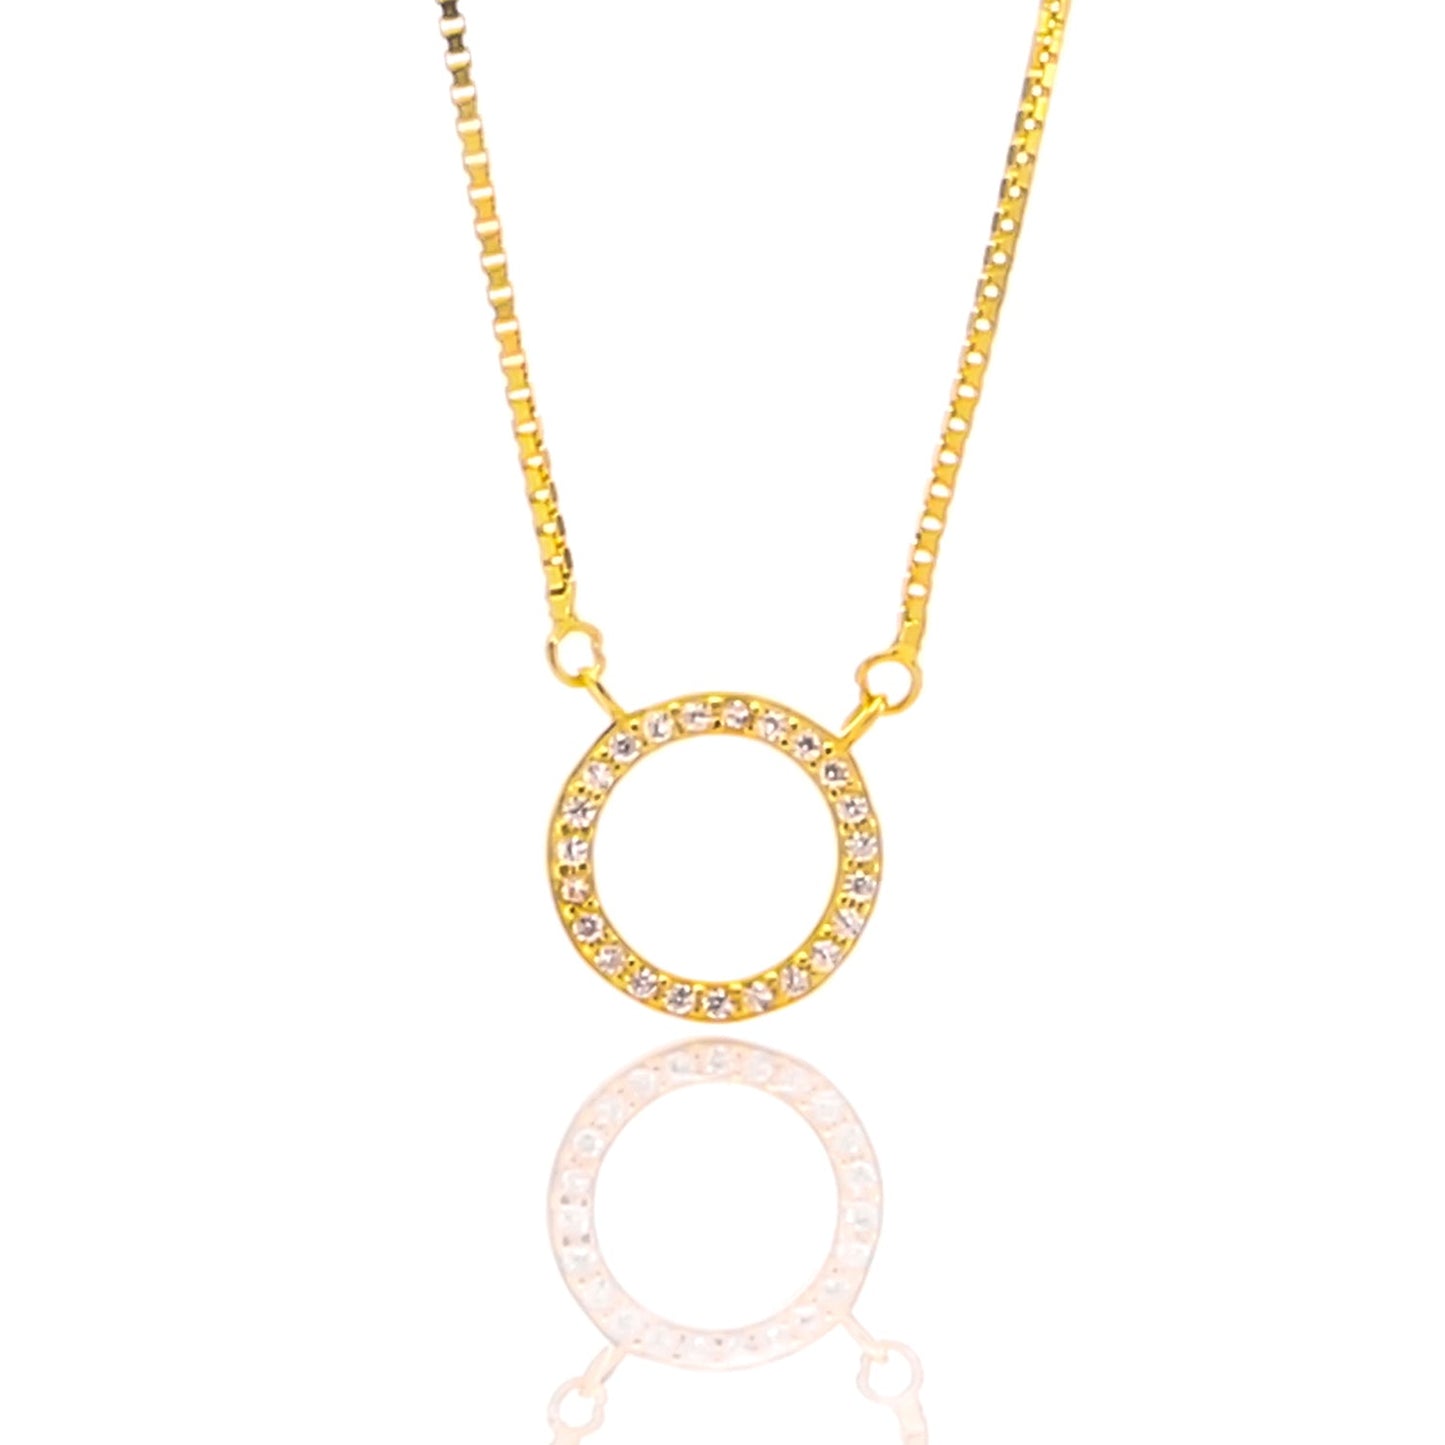 Circle of life Pendant Necklace and Earrings Set - ARJW1021GD ARCADIO